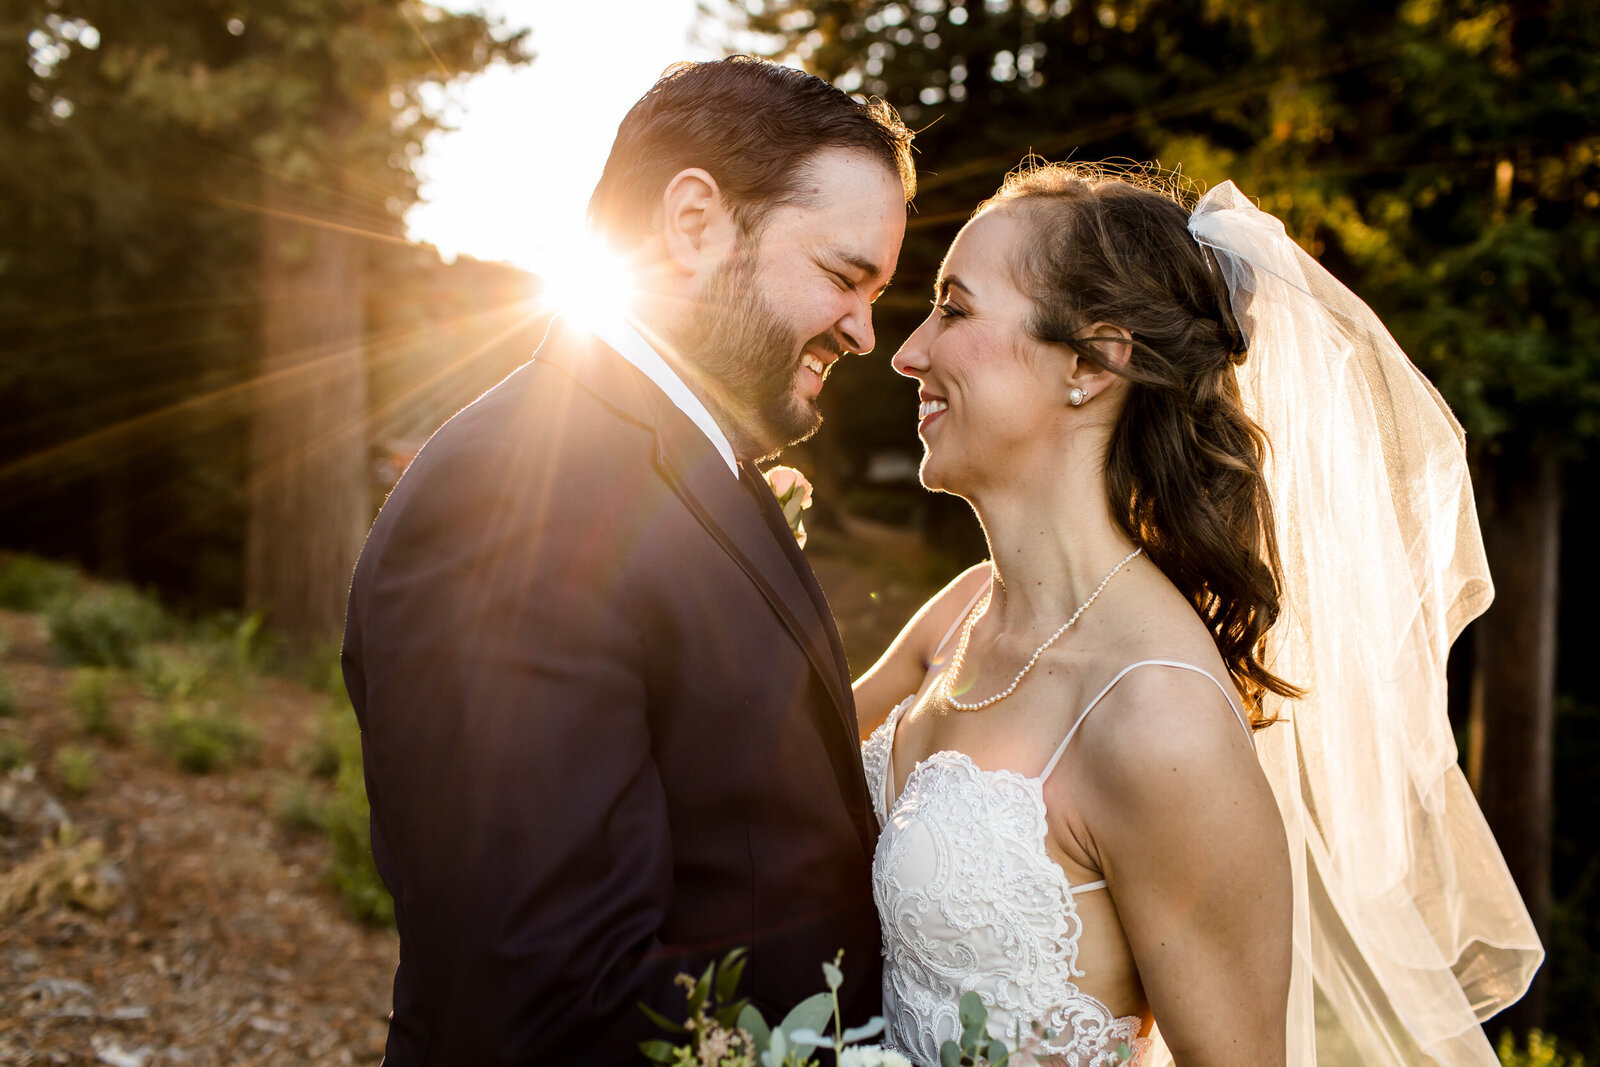 sunkissed bride and groom on wedding day